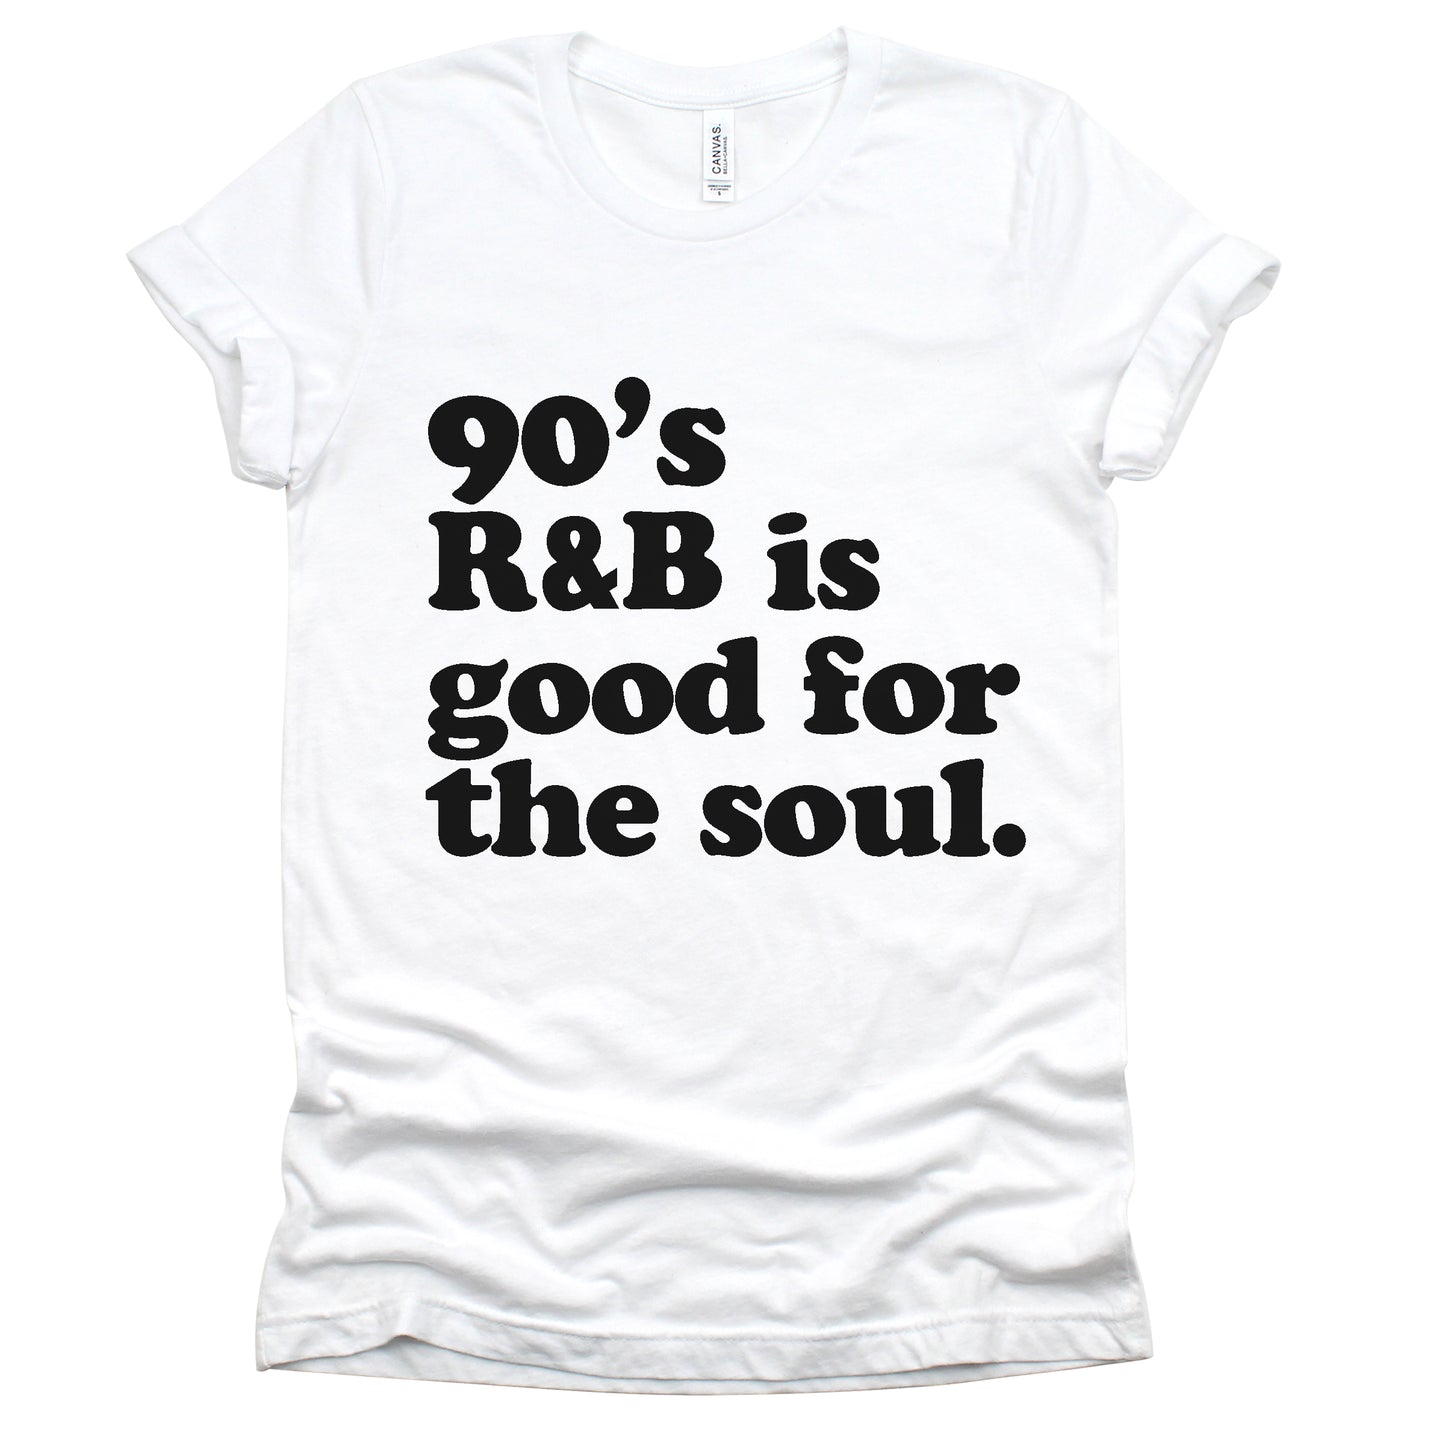 "90's R&B Is Good For The Soul" Tee